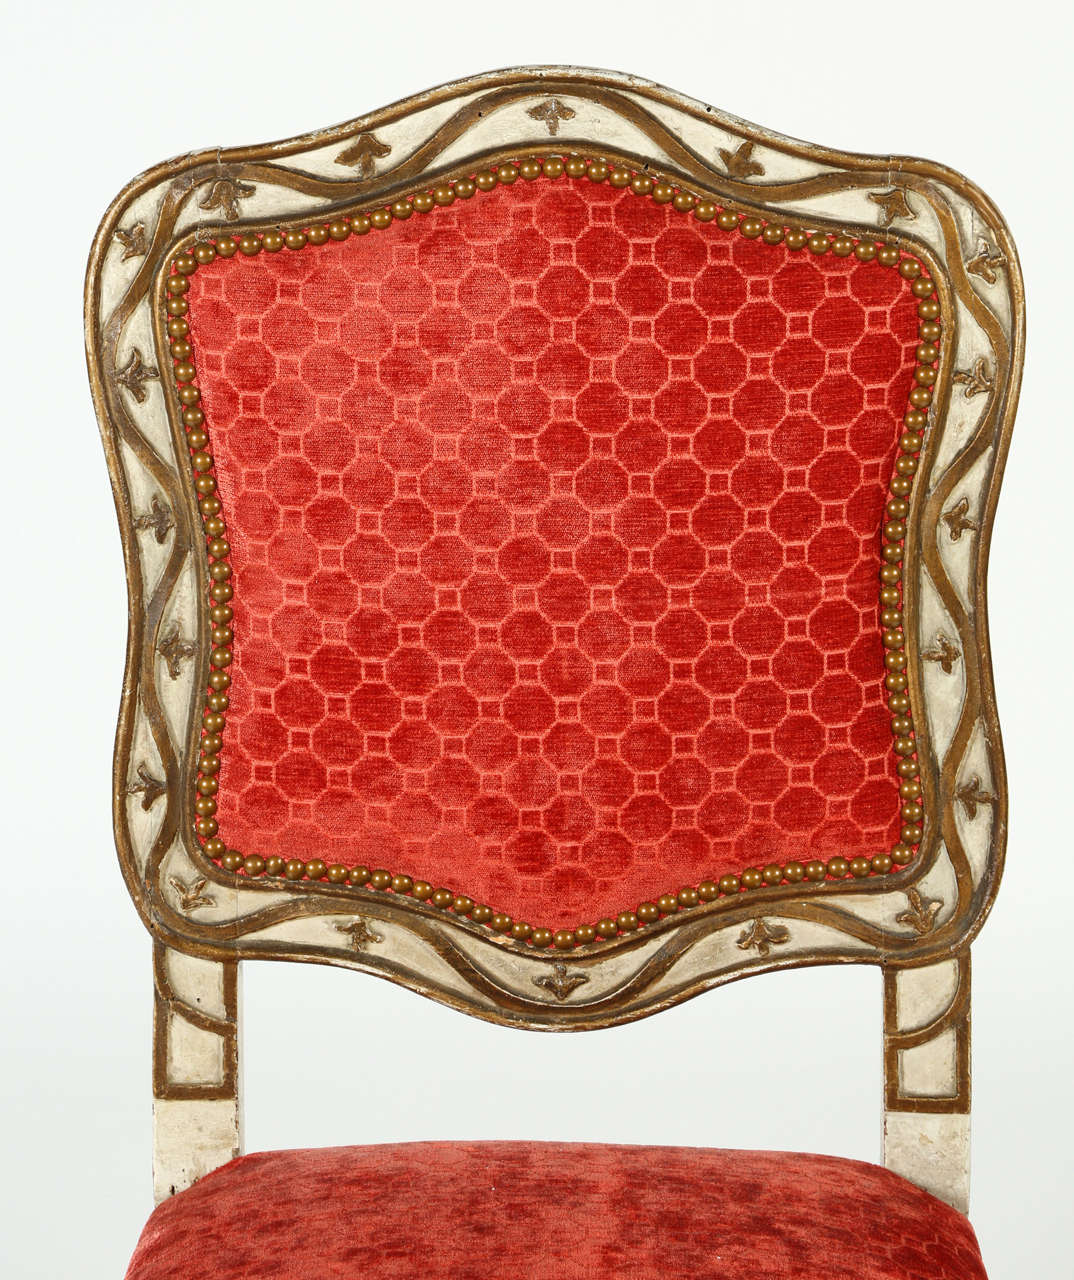 18th Century Louis XVIII Parcel-Gilt Upholstered Chair